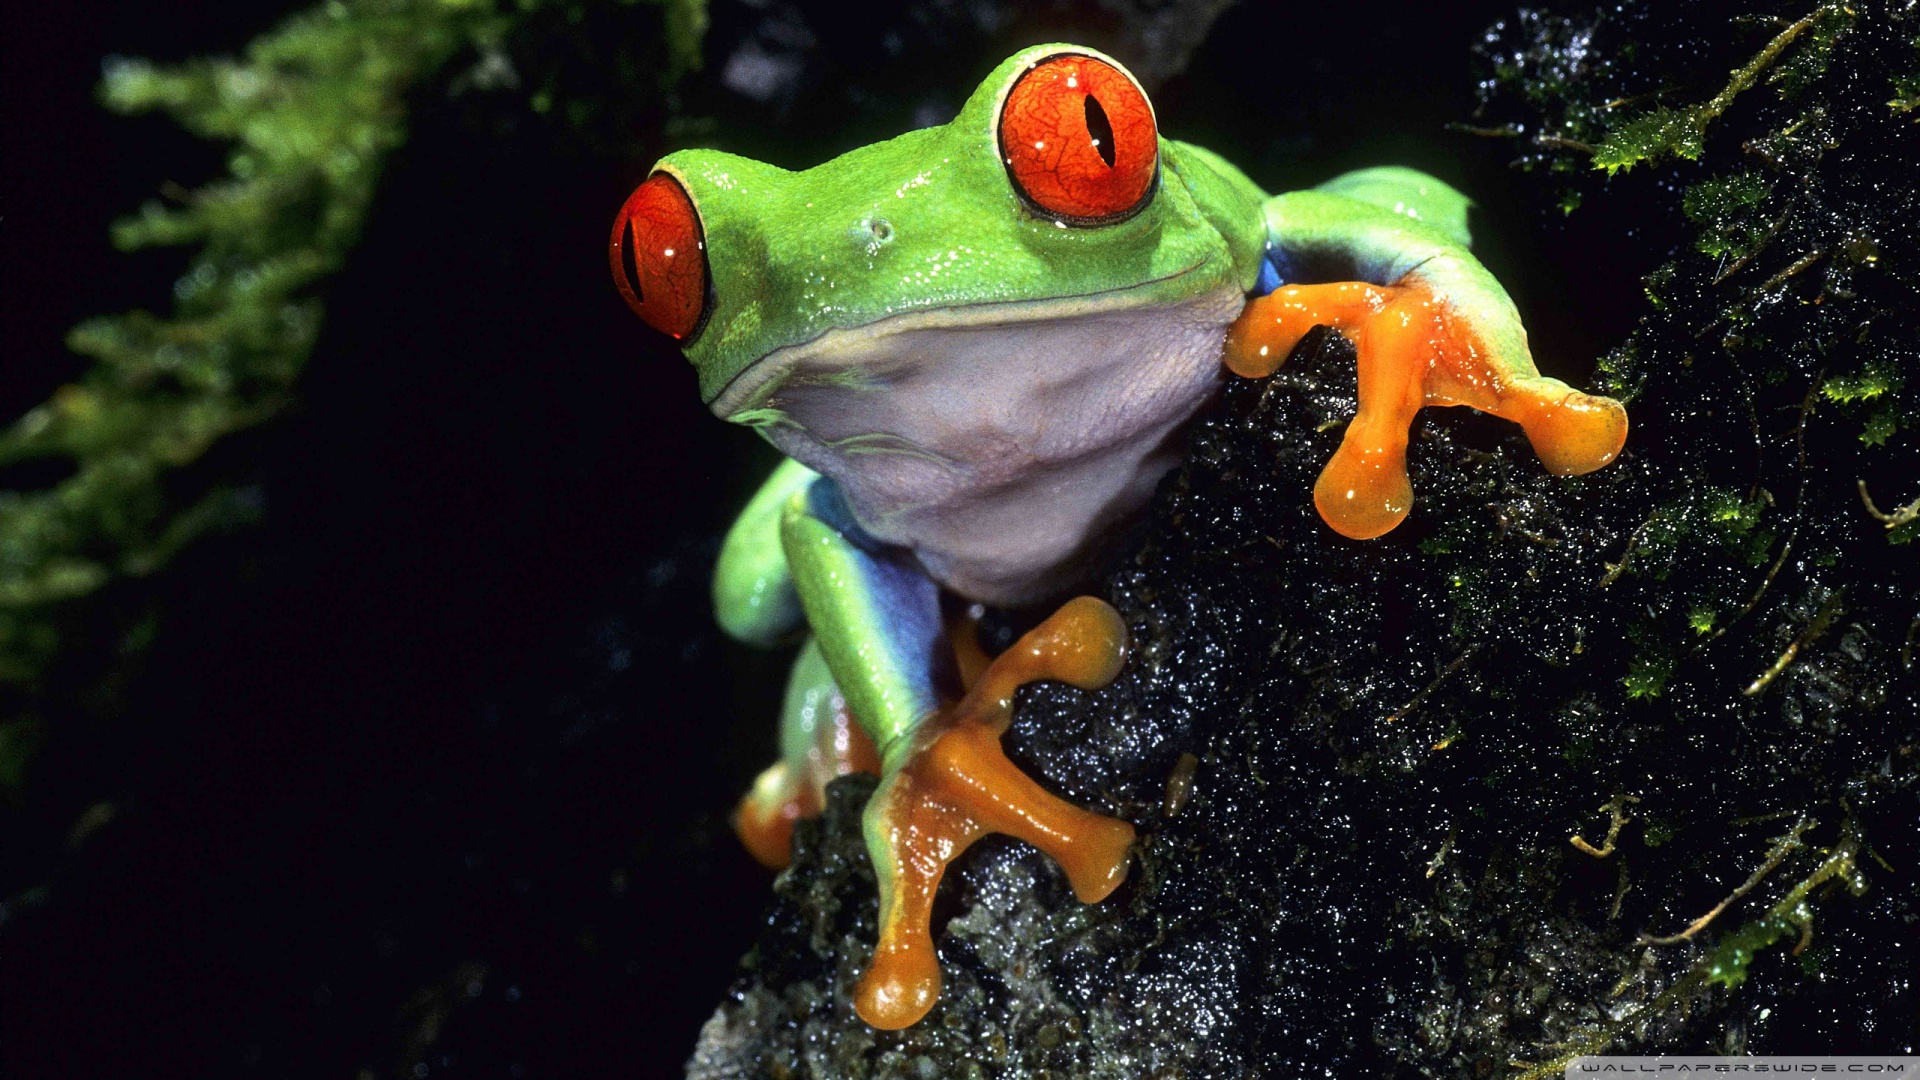 Download Red Eyed Tree Frog Wallpaper 1920x1080 1920x1080